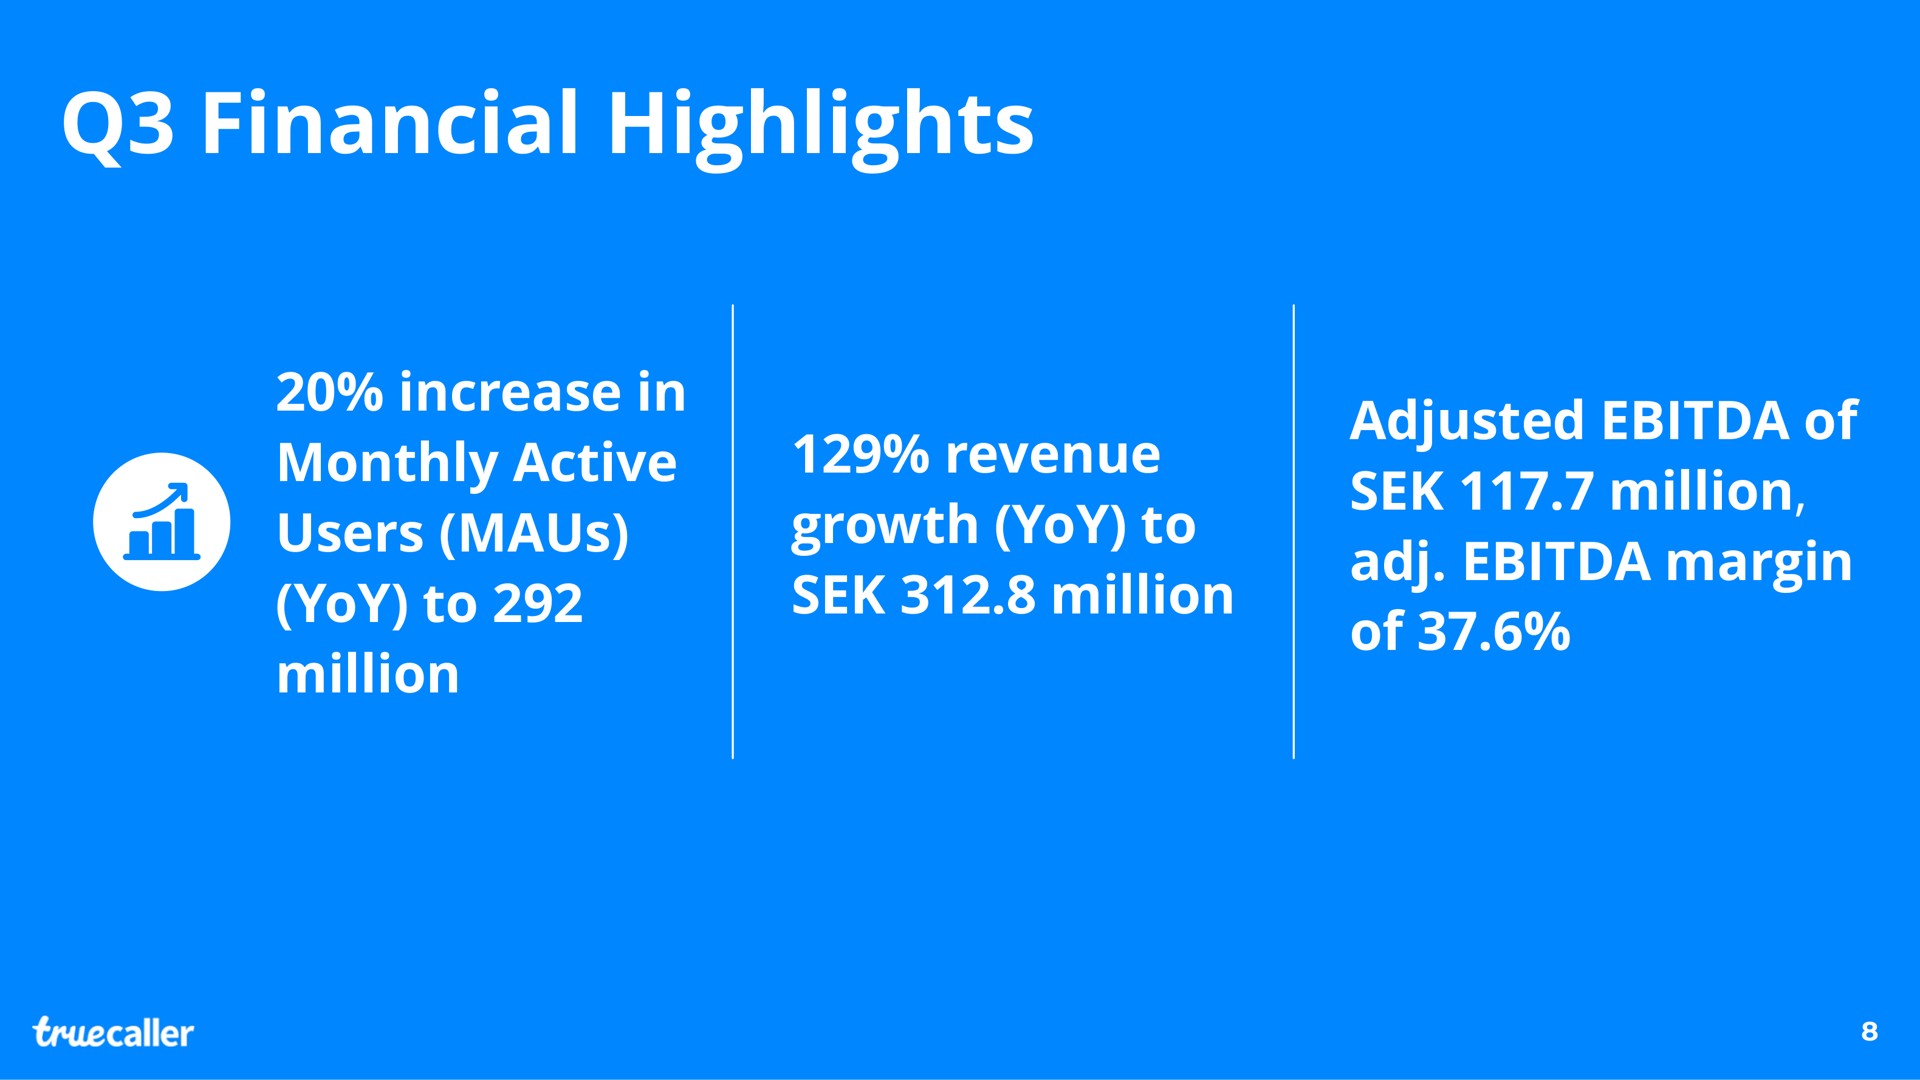 financial highlights increase in monthly active users yoy to million revenue growth yoy to million adjusted of million margin of | Truecaller